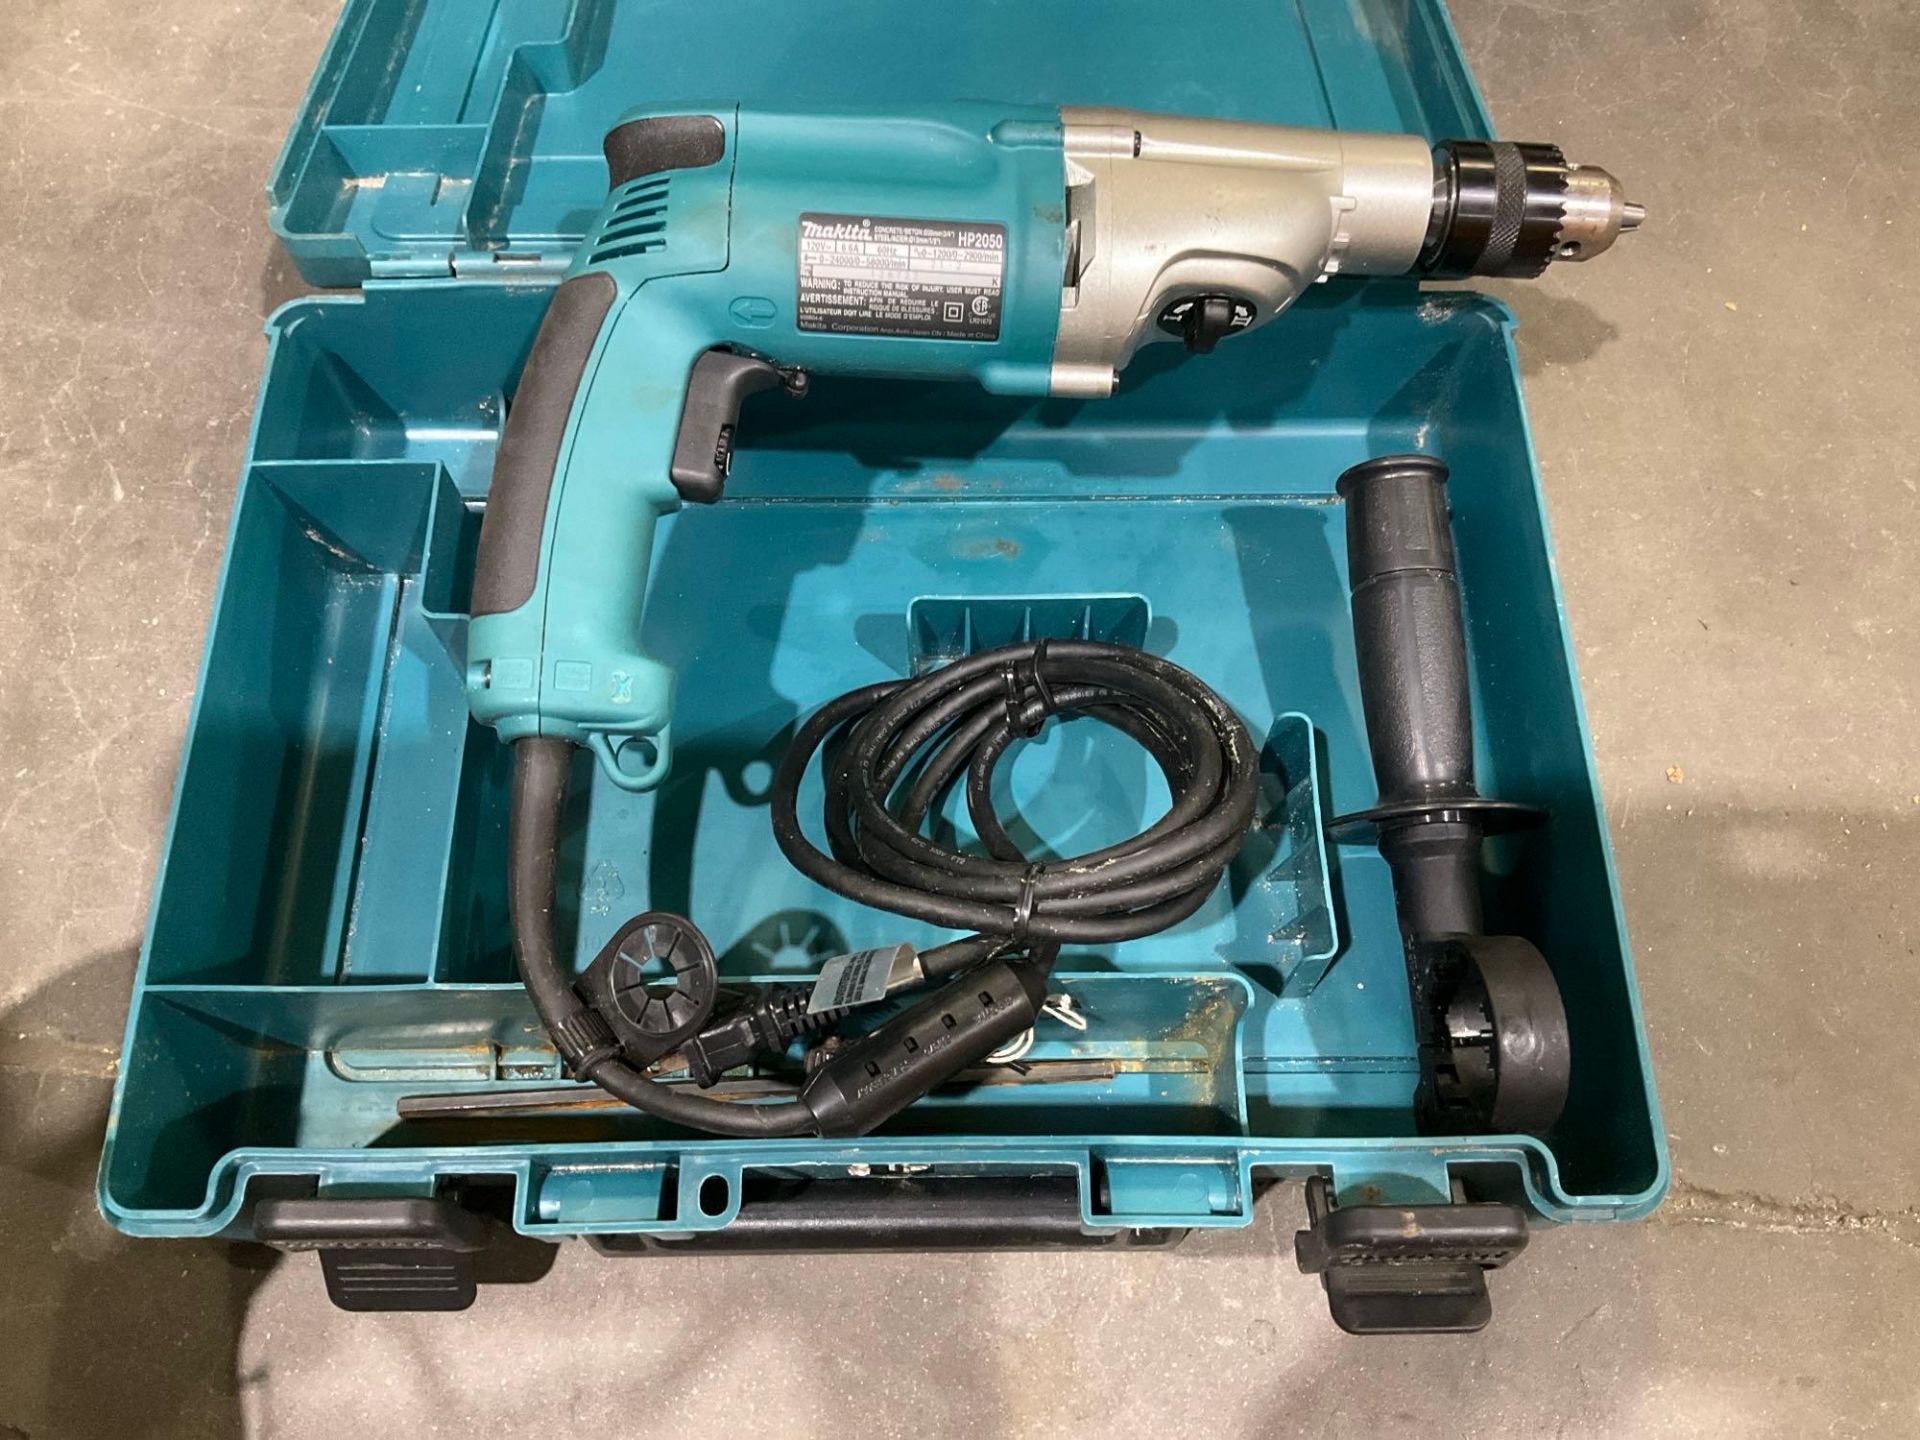 MAKITA 2 SPEED HAMMER DRILL MODEL HP2050 WITH CARRYING CASE , 120VOLTS, 6.6A, RECONDITIONED - Image 2 of 6